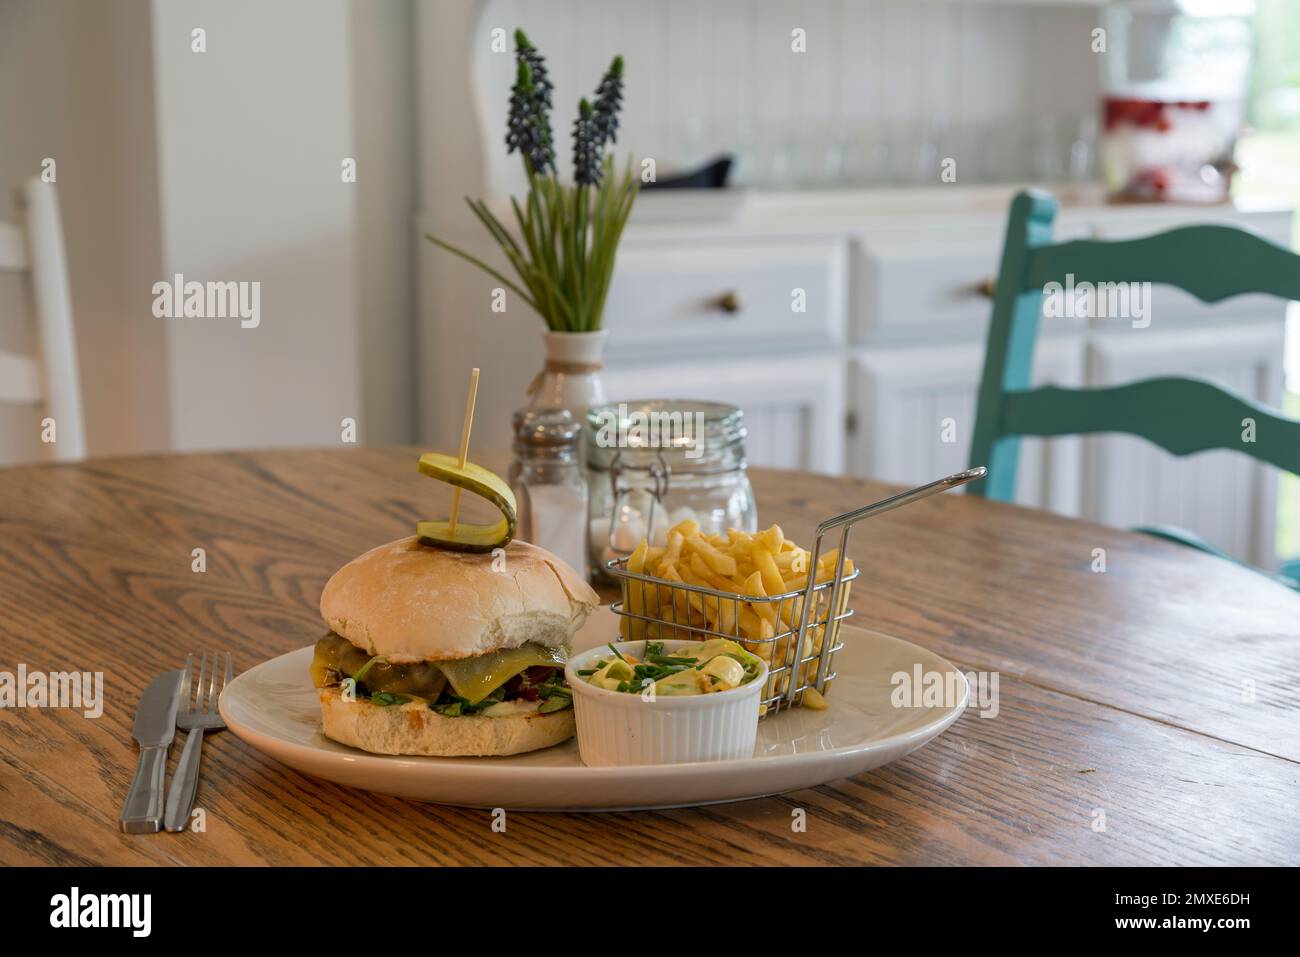 Cafe interior hamburger with chips and coleslaw served on a white plate Stock Photo